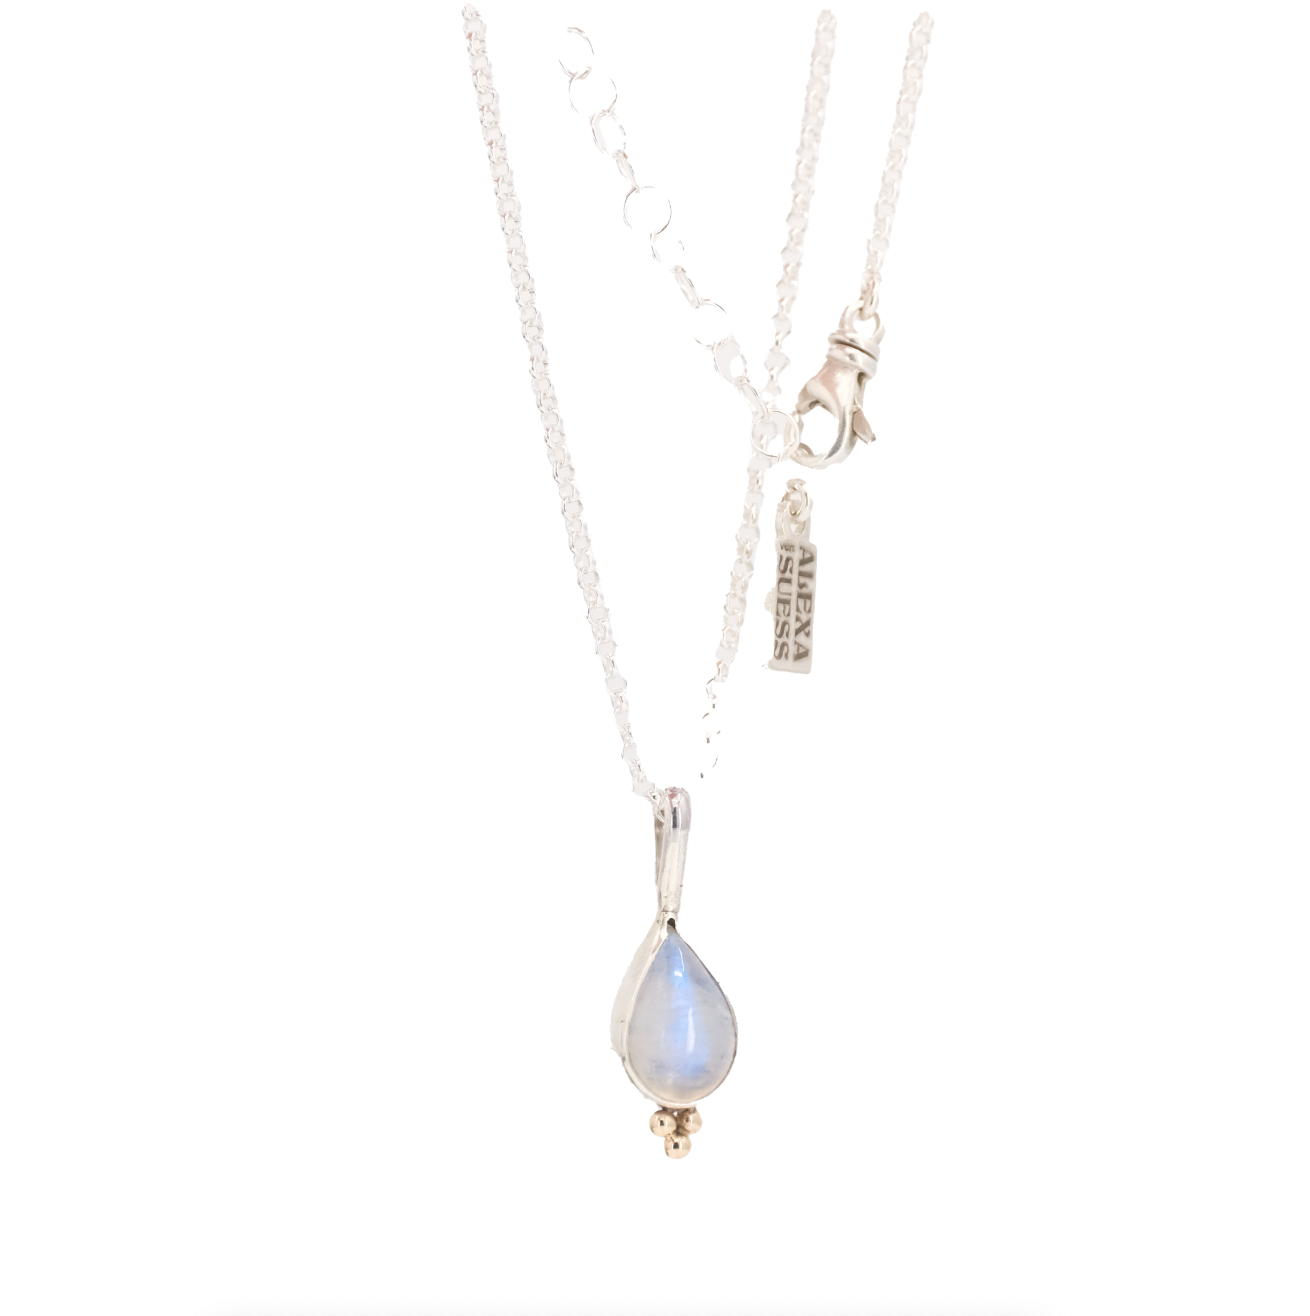 Moonstone Dewdrop Necklace - One of a Kind